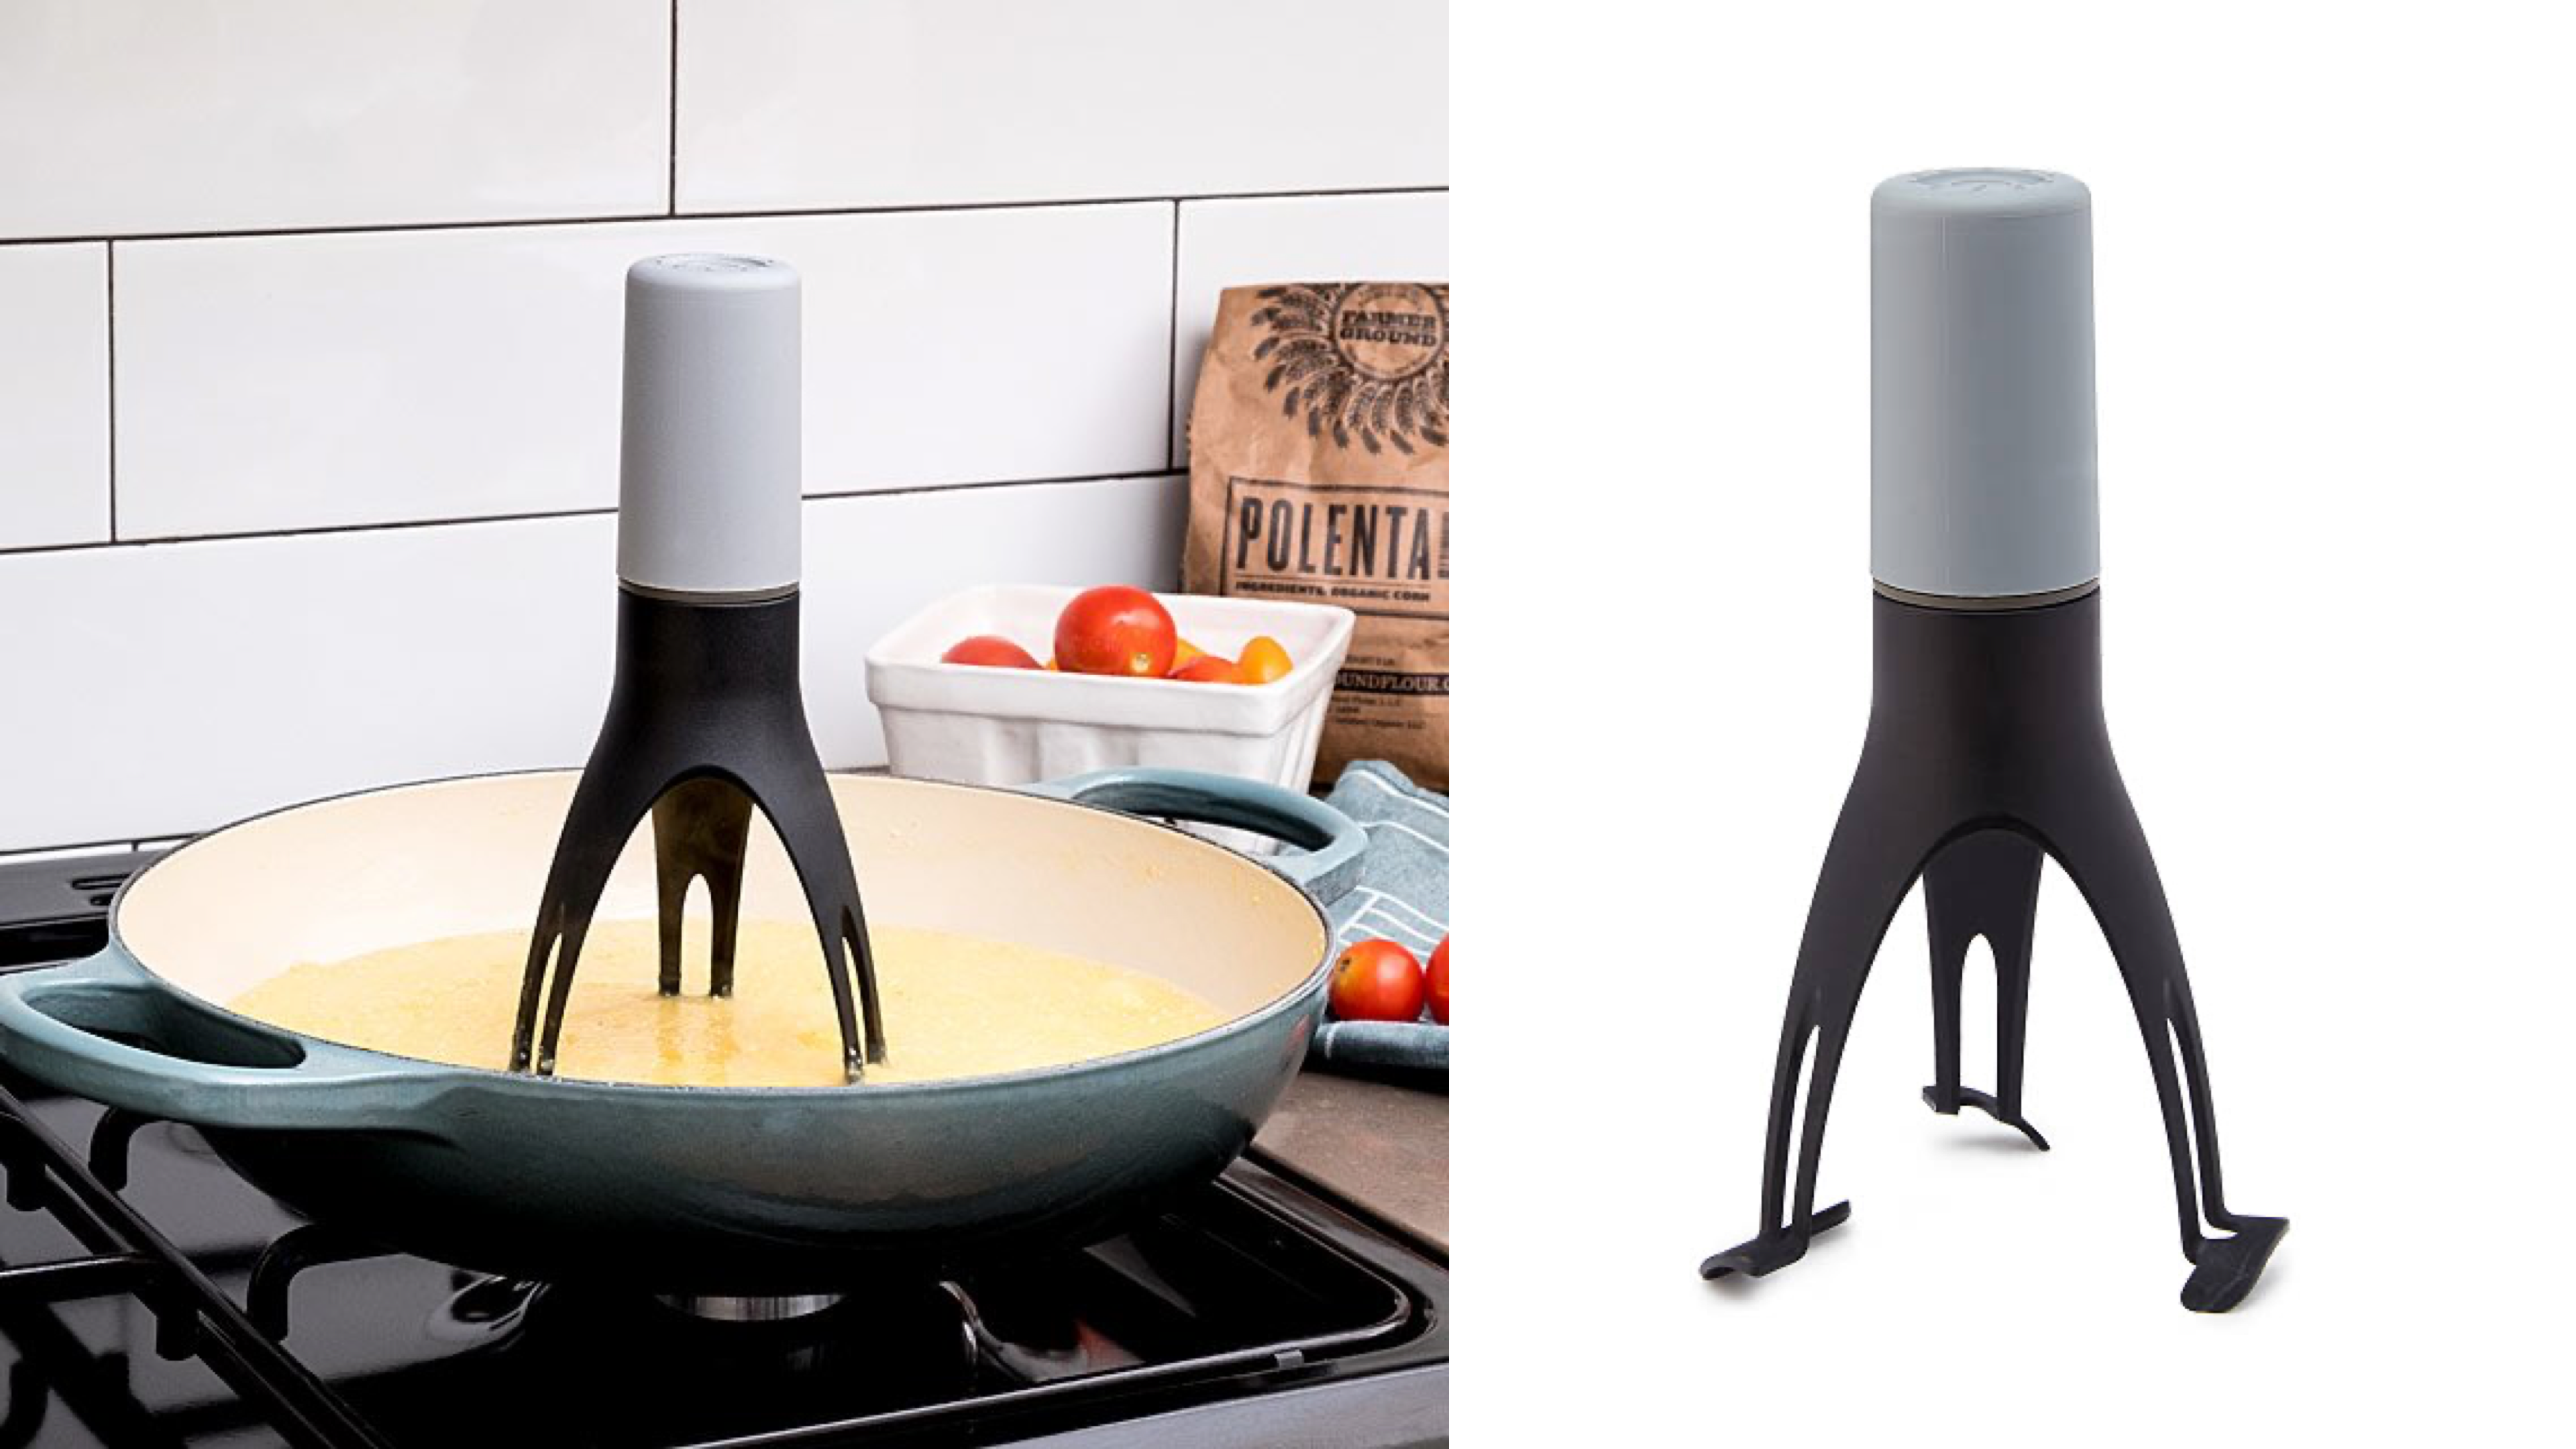 automatic pan stirrer so you don't have to stand over the stove while things are cooking